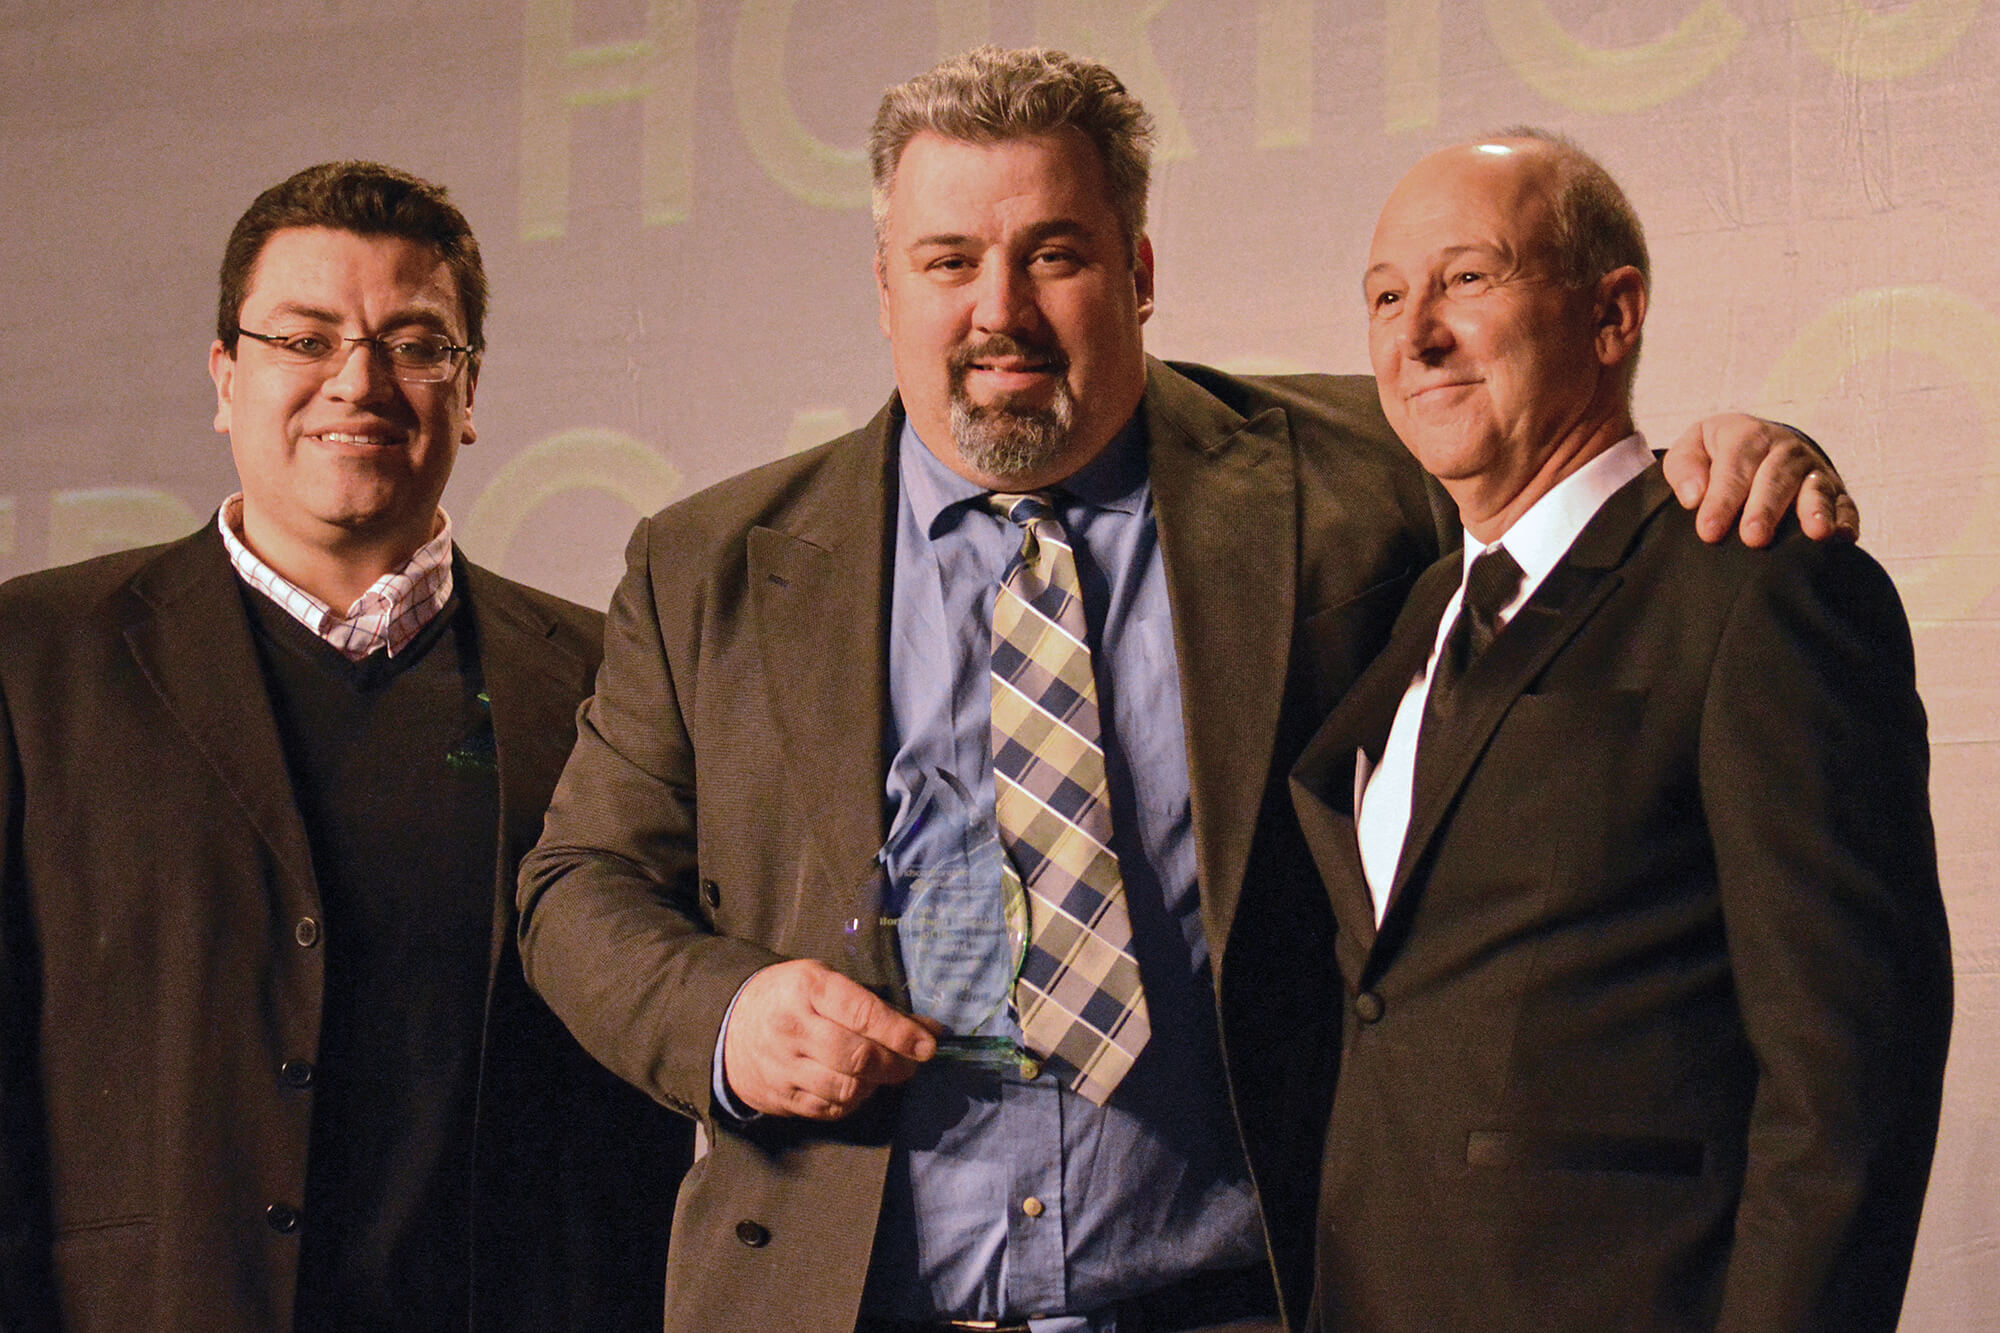 three men on stage, one holding and award